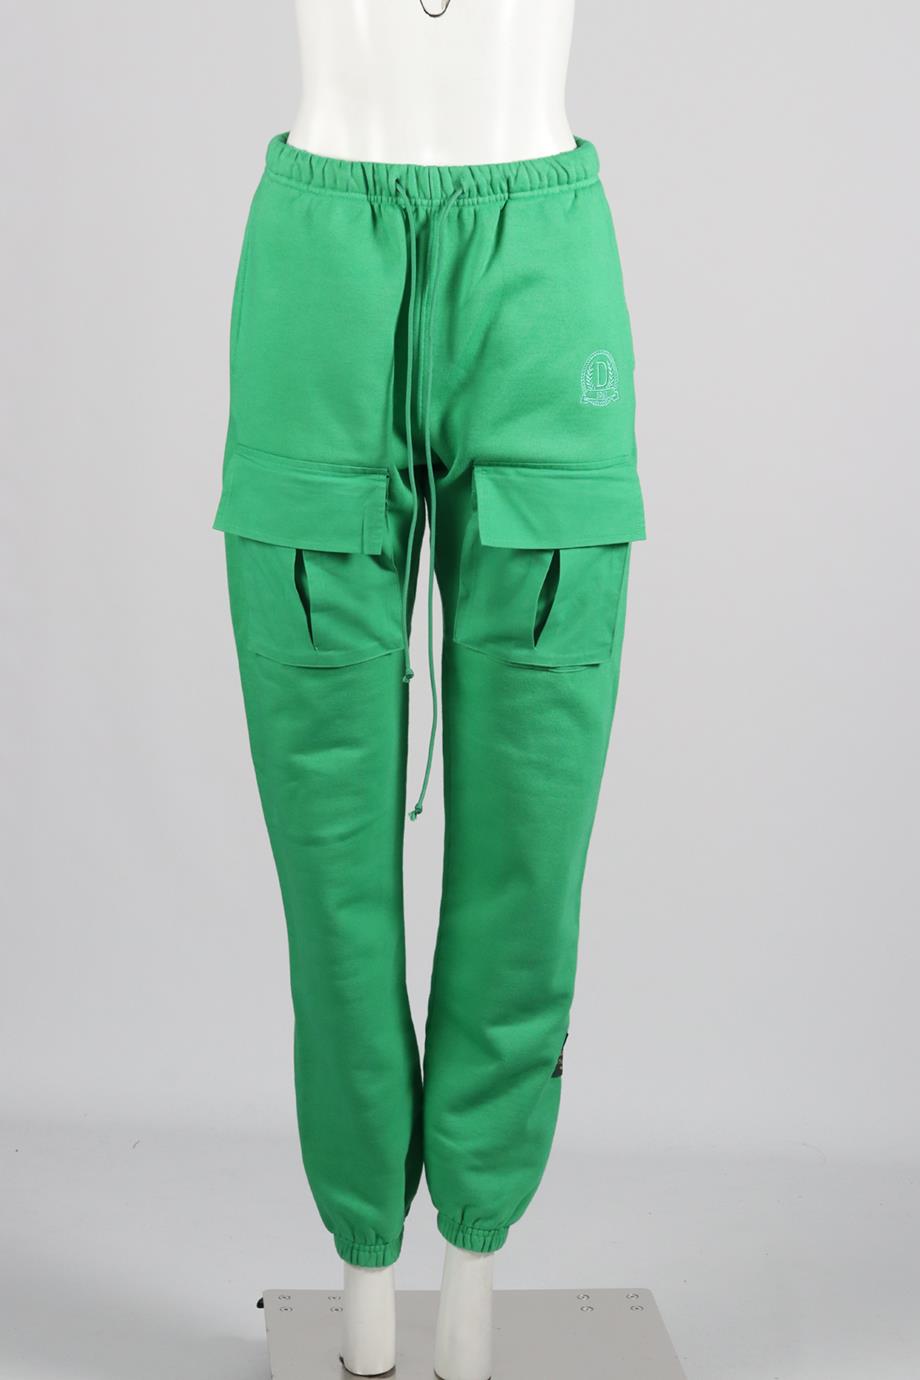 DANZY COTTON TRACK PANTS SMALL